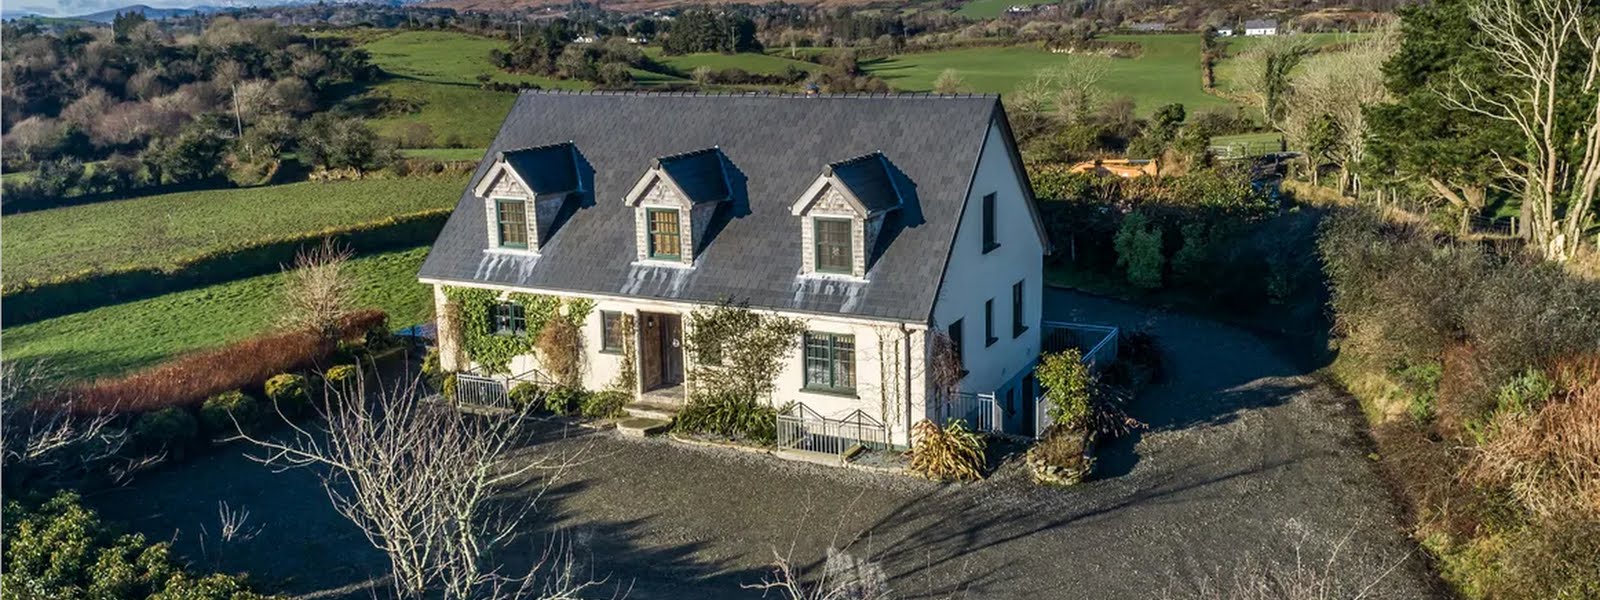 This picturesque West Cork home with separate basement apartment is on the market for €695,000